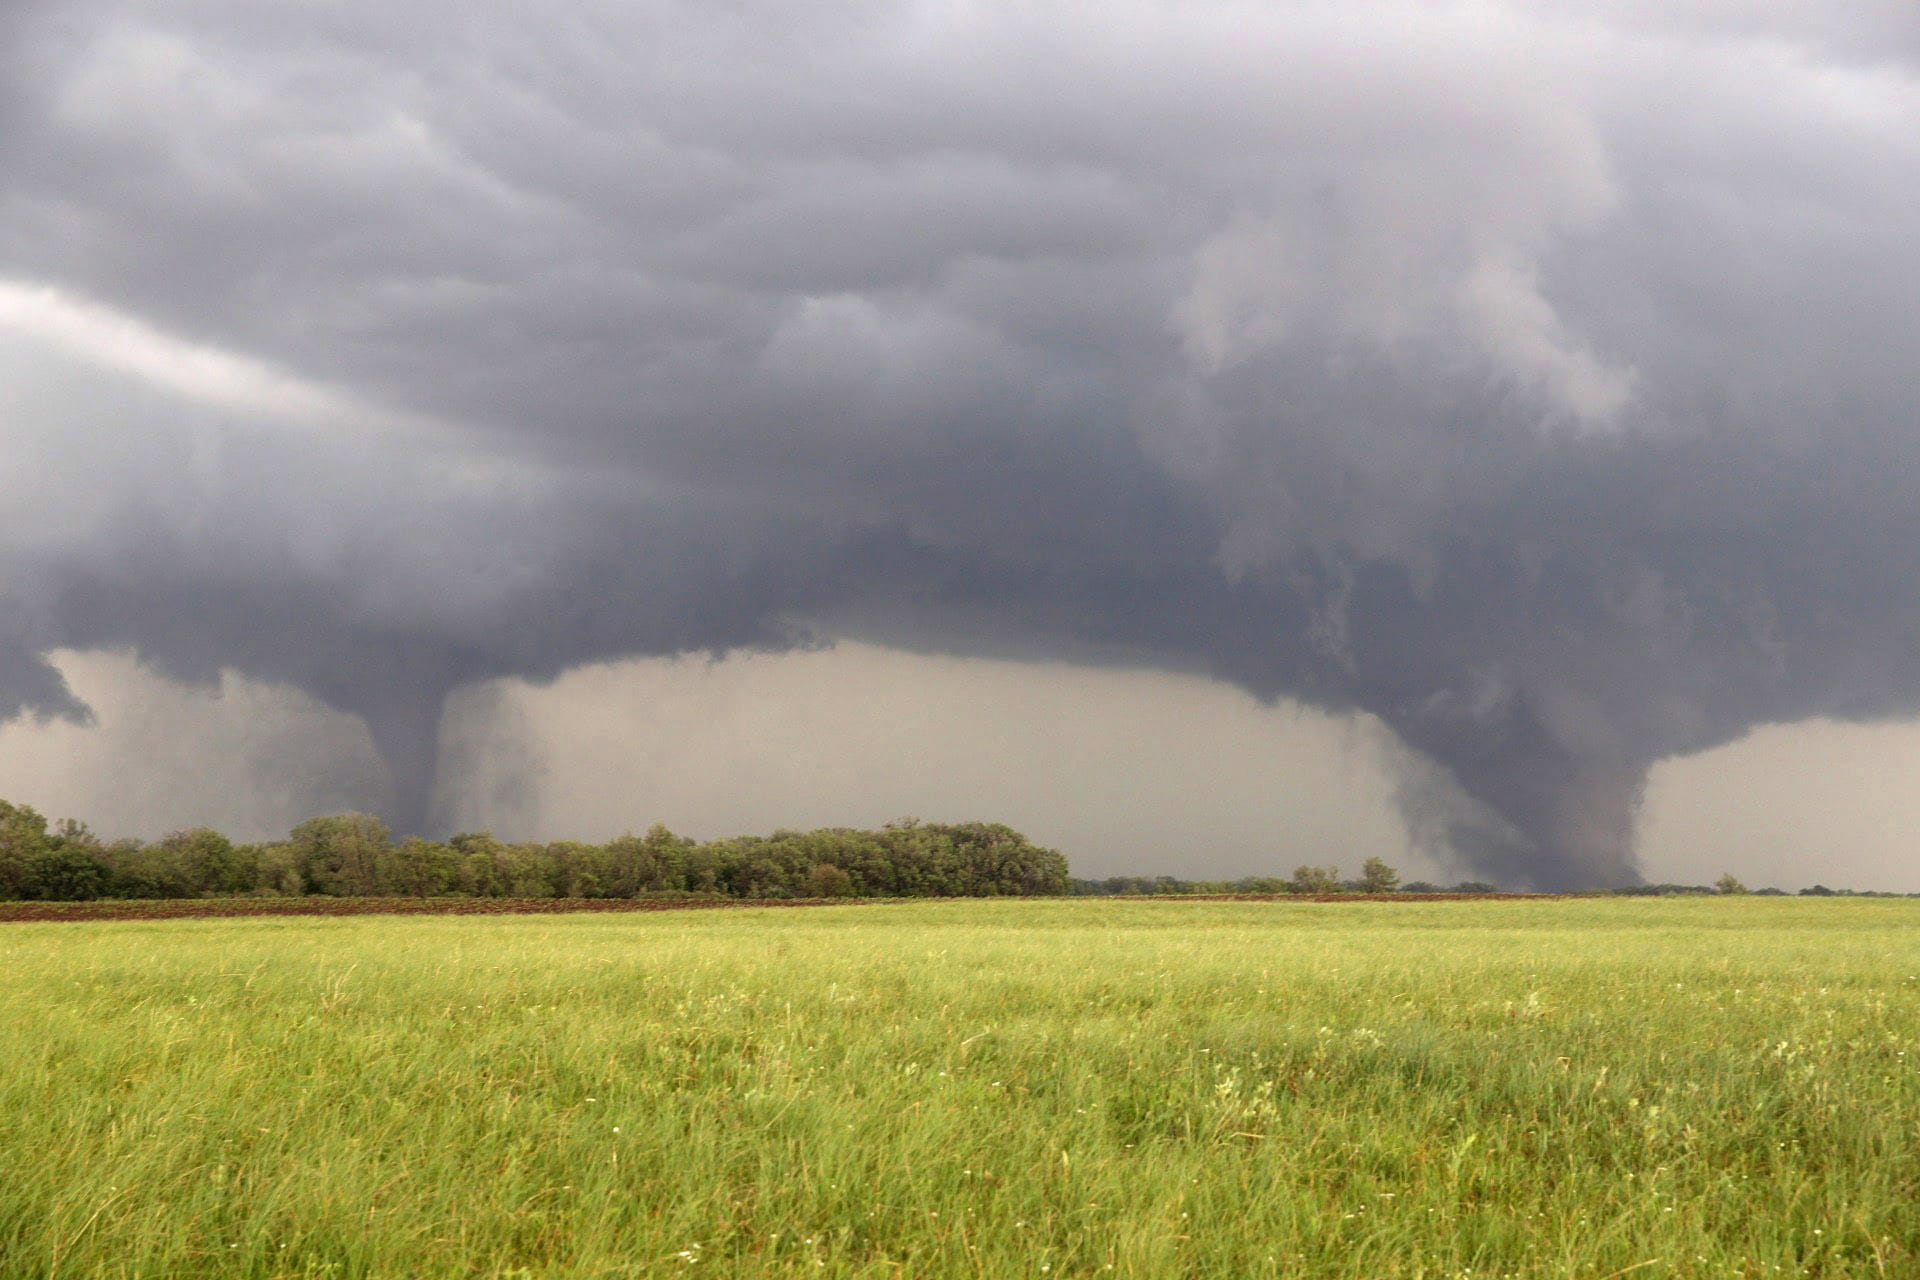 Two tornadoes approach Pilger, Neb., on Monday.